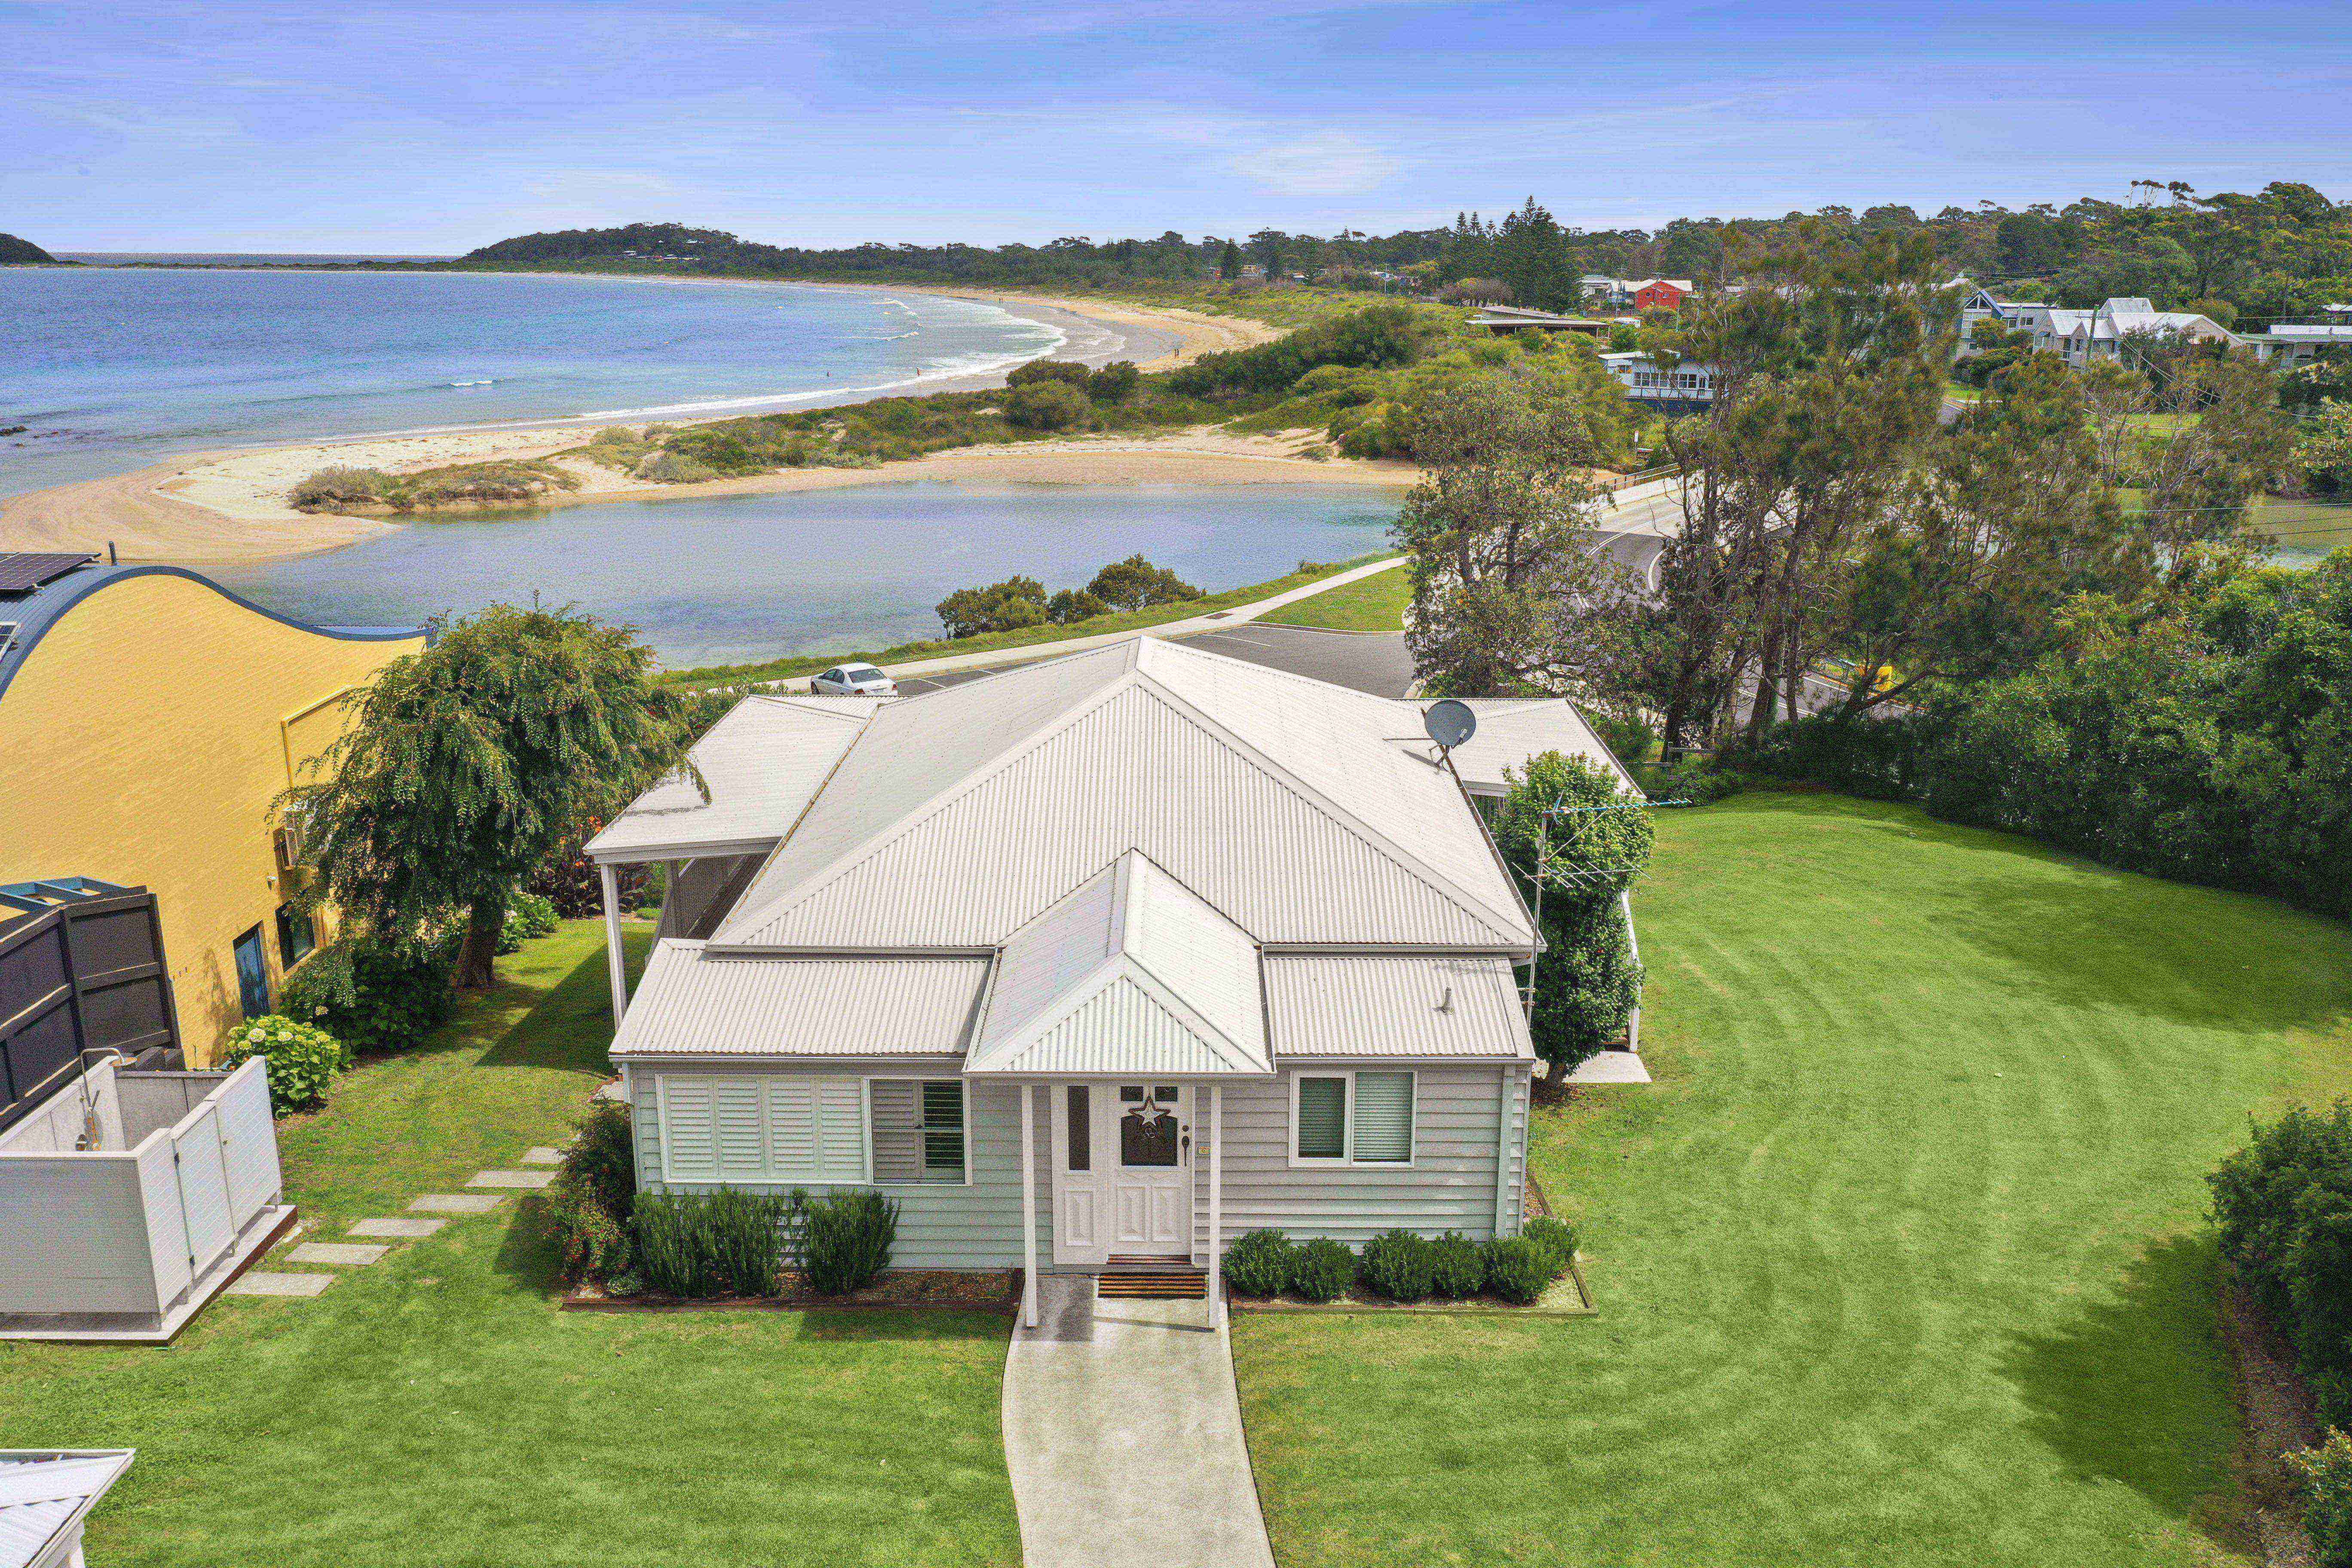 Iconic Mossy Point beachfront house expected to fetch nearly $3 million